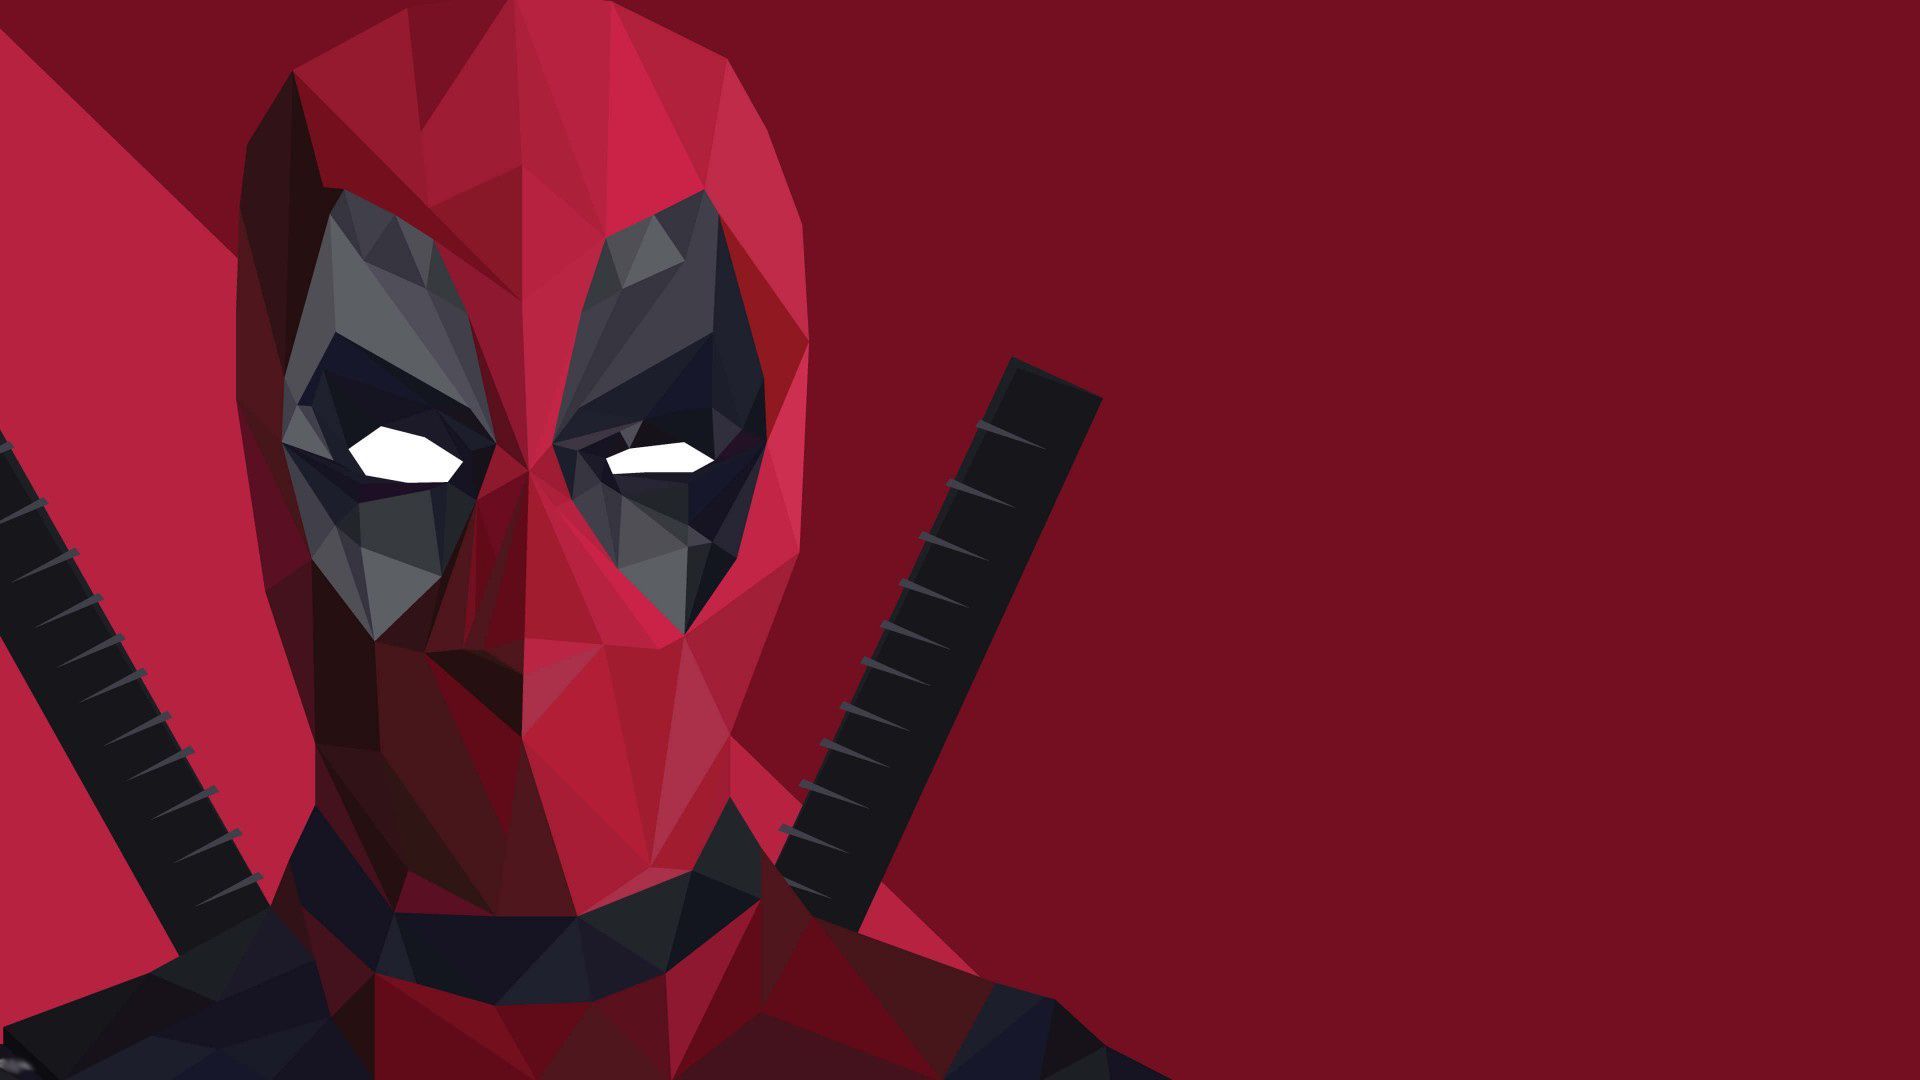 Low Poly Deadpool Wallpapers   Top Free Low Poly Deadpool